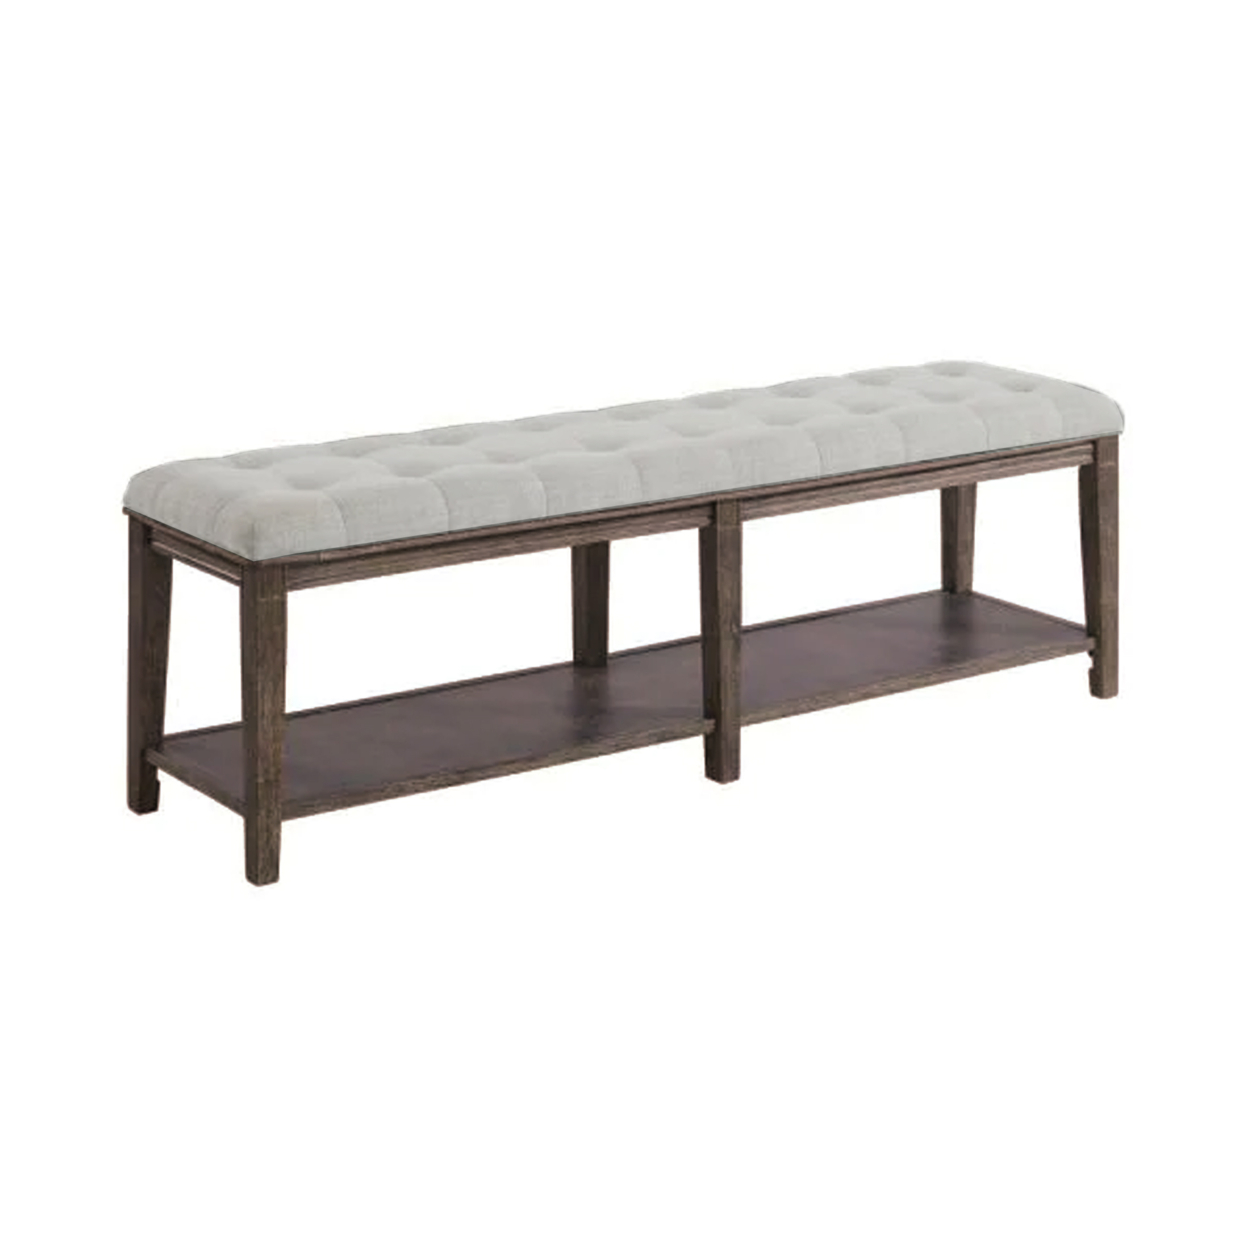 Bench With Button Tufted Seat And Open Shelf, Beige- Saltoro Sherpi